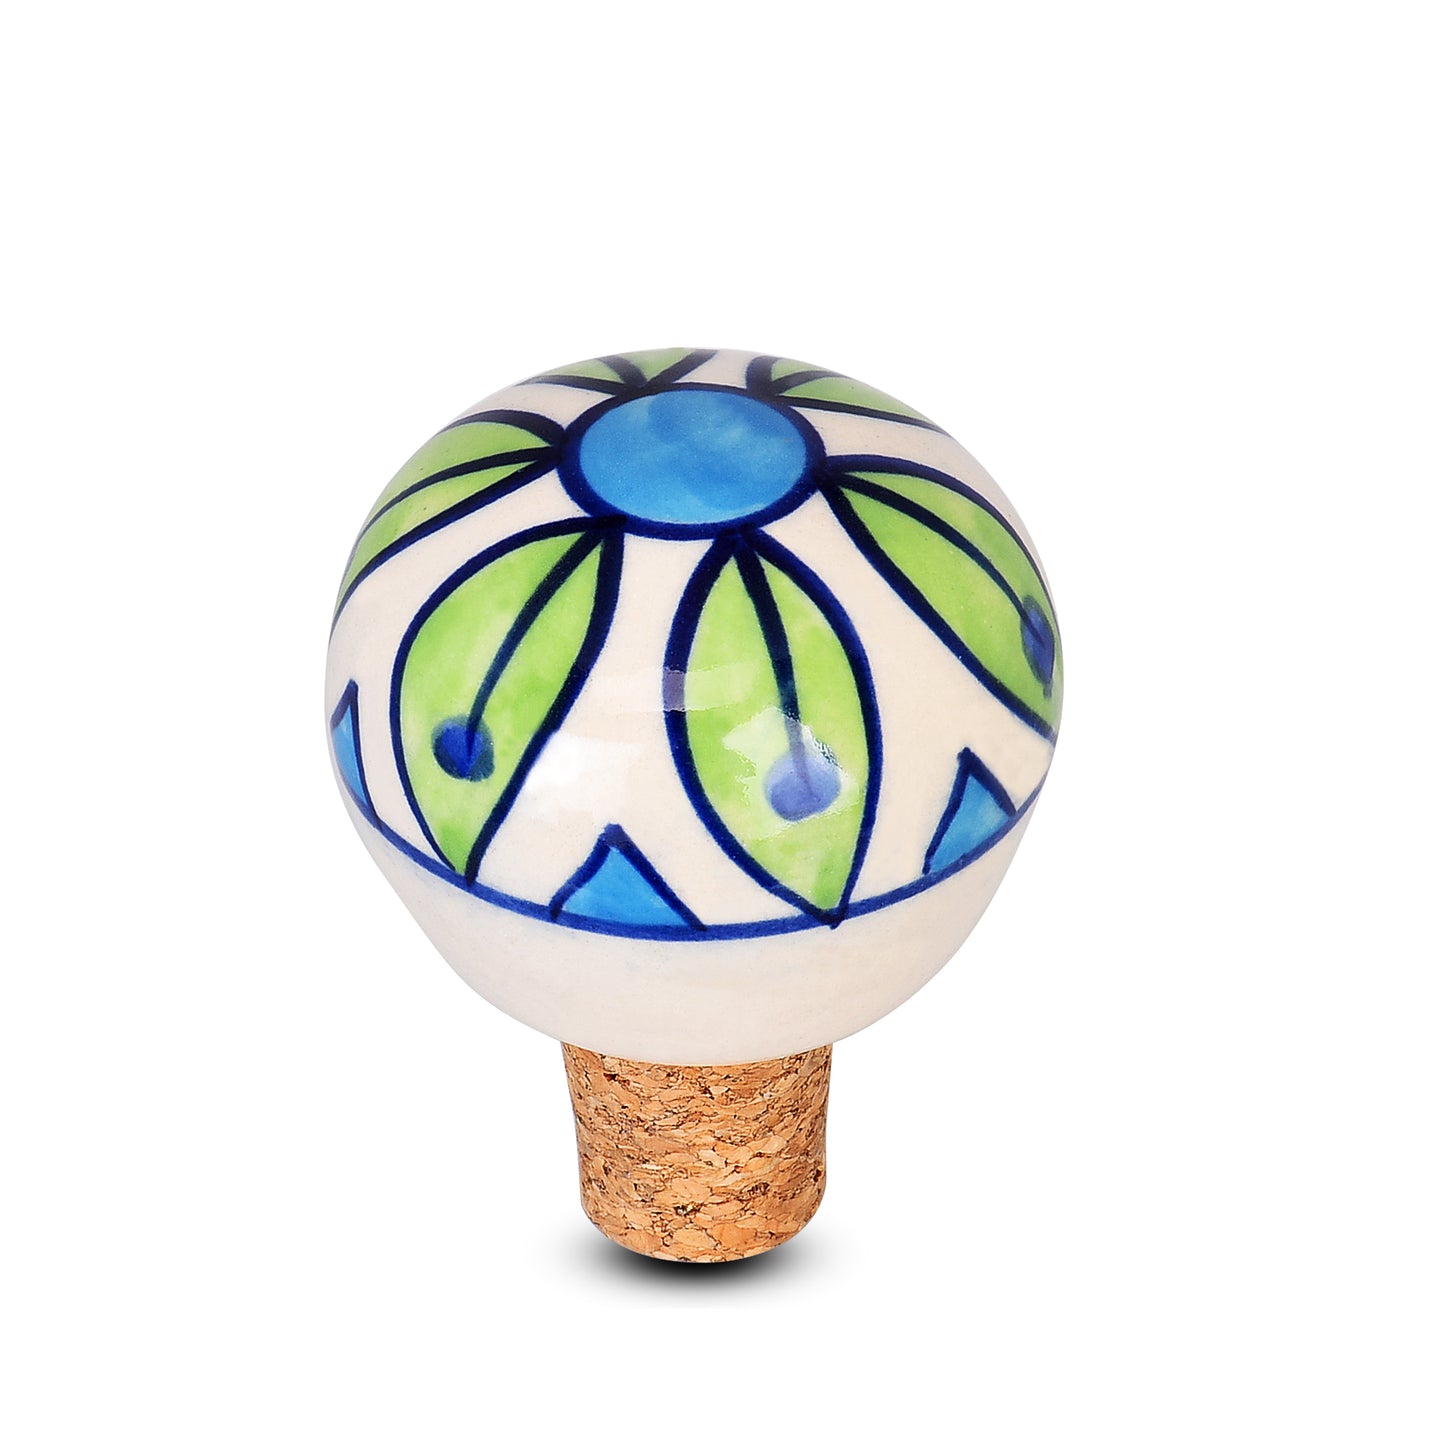 Floral Harmony Ceramic Wine Bottle Stopper - Green Leaves with Blue Center